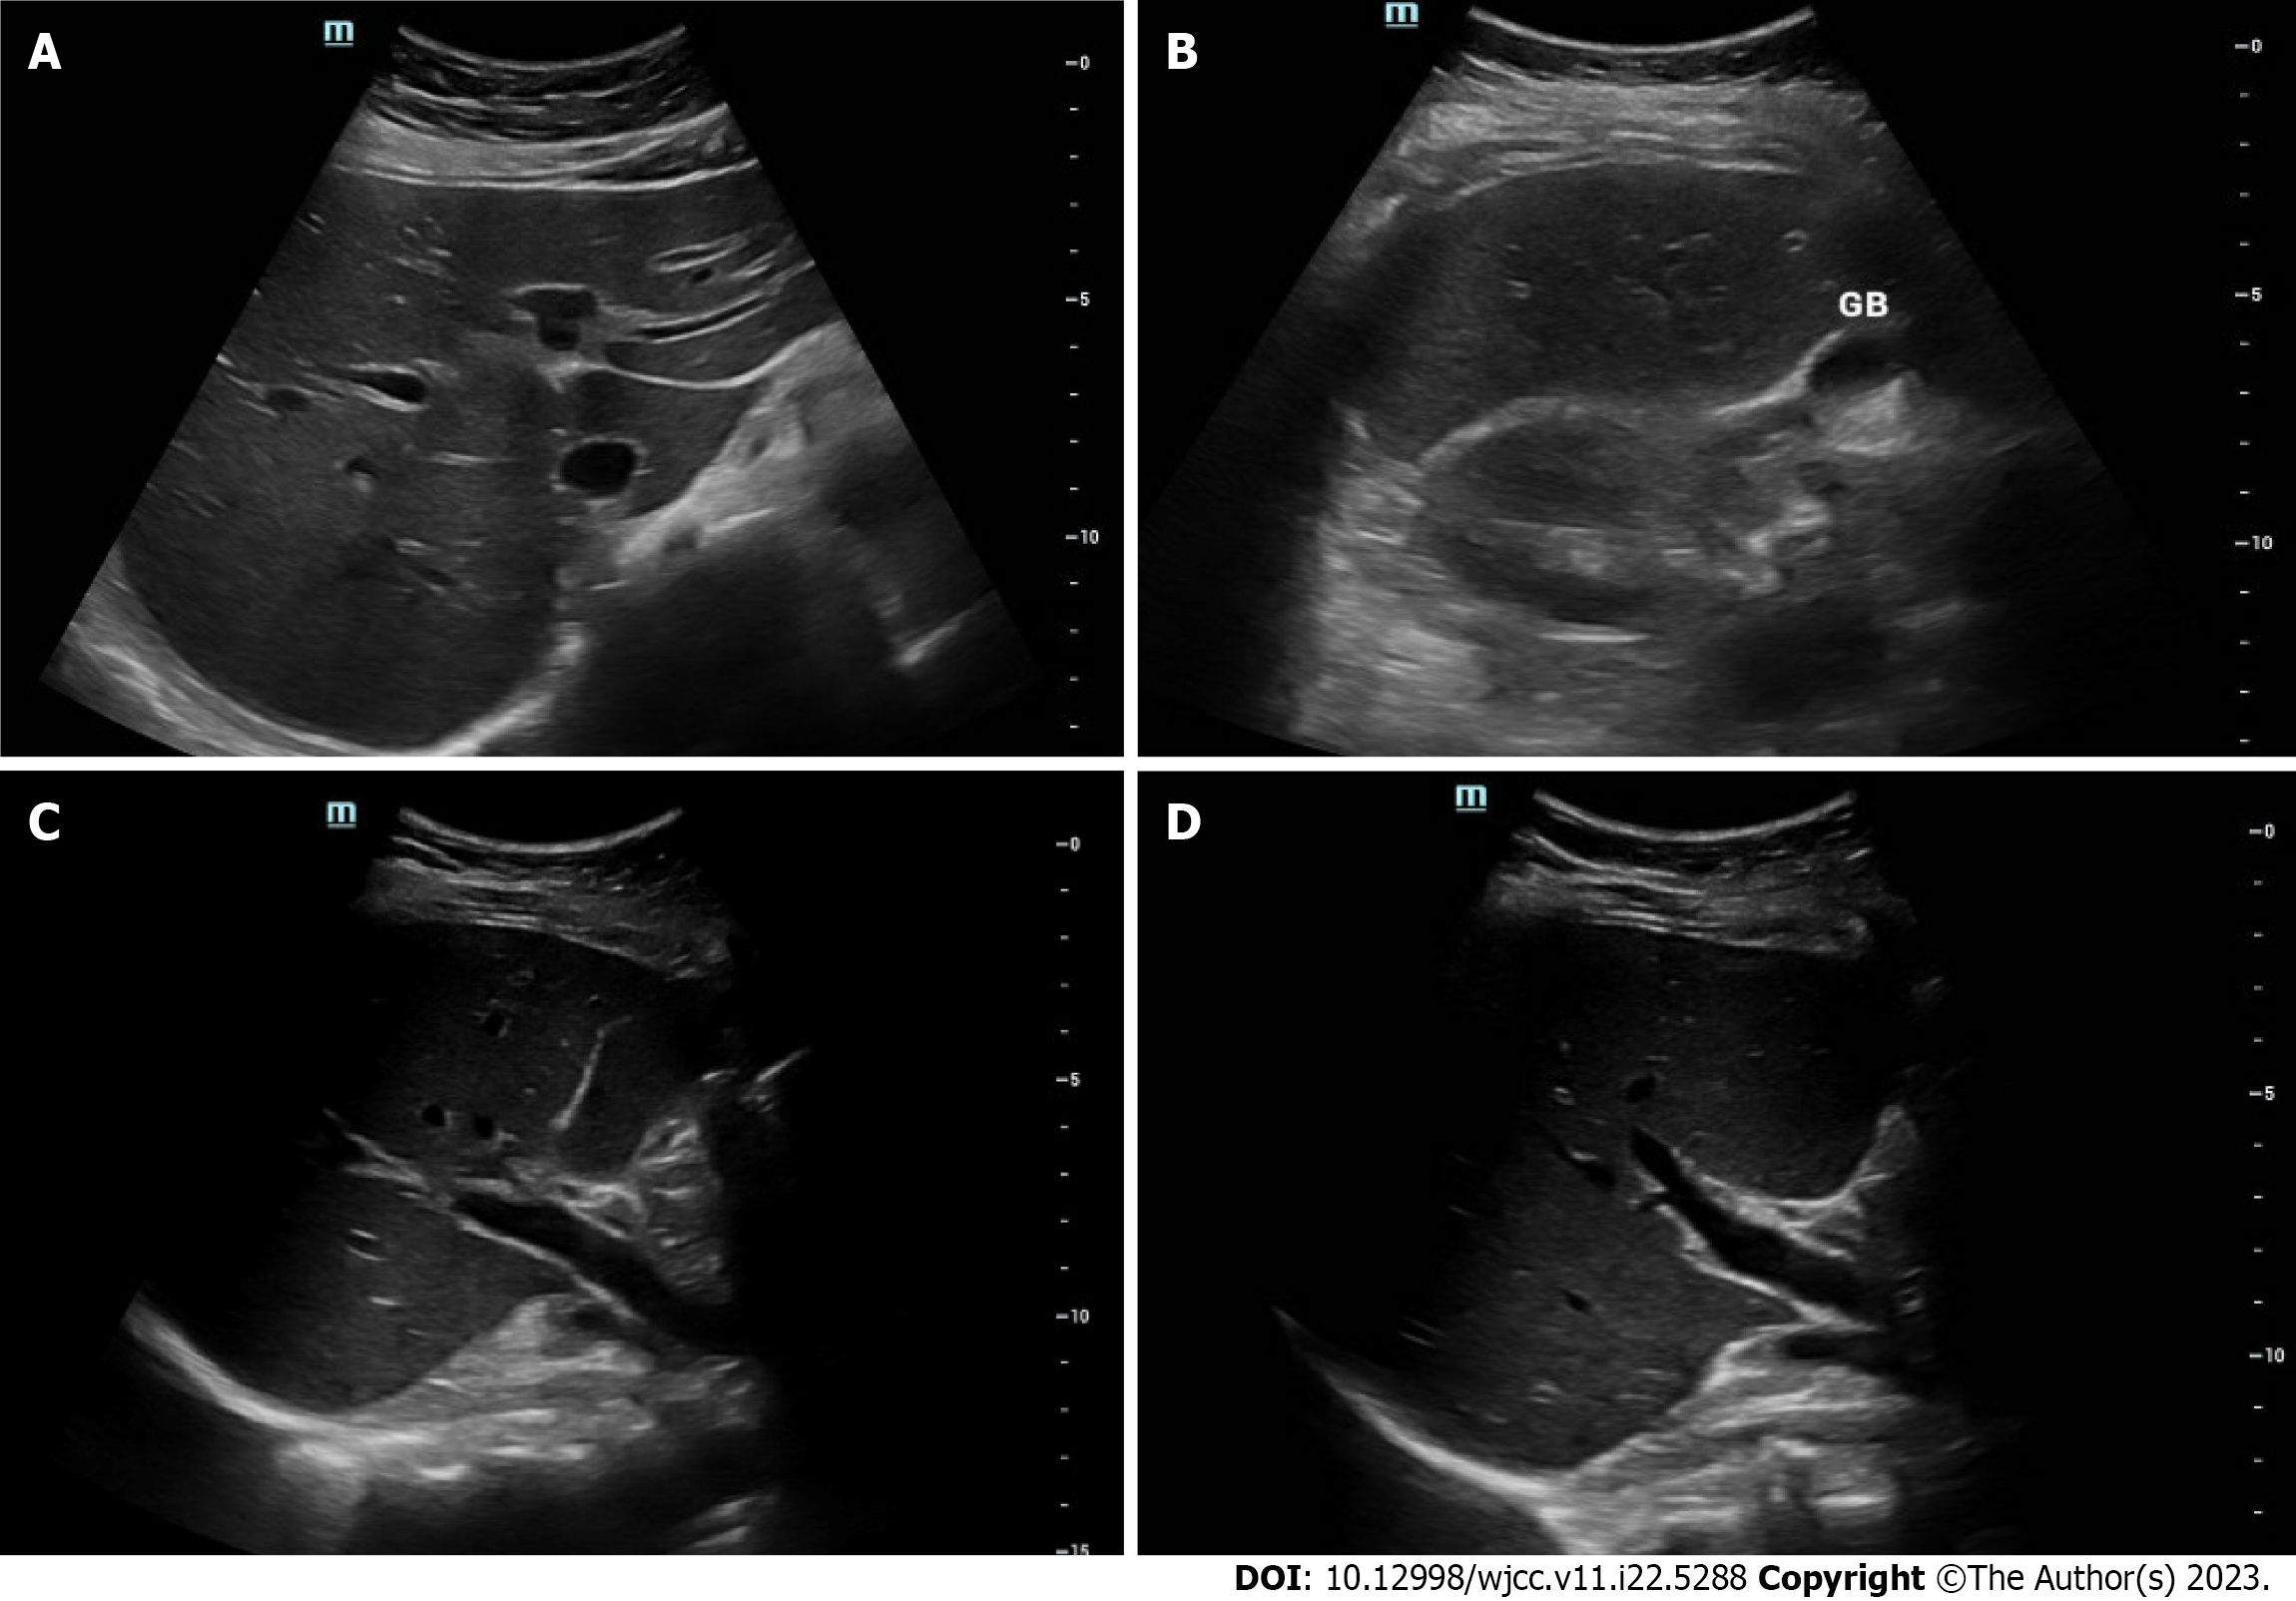 Acute hepatitis of unknown etiology in an adult female: A case report